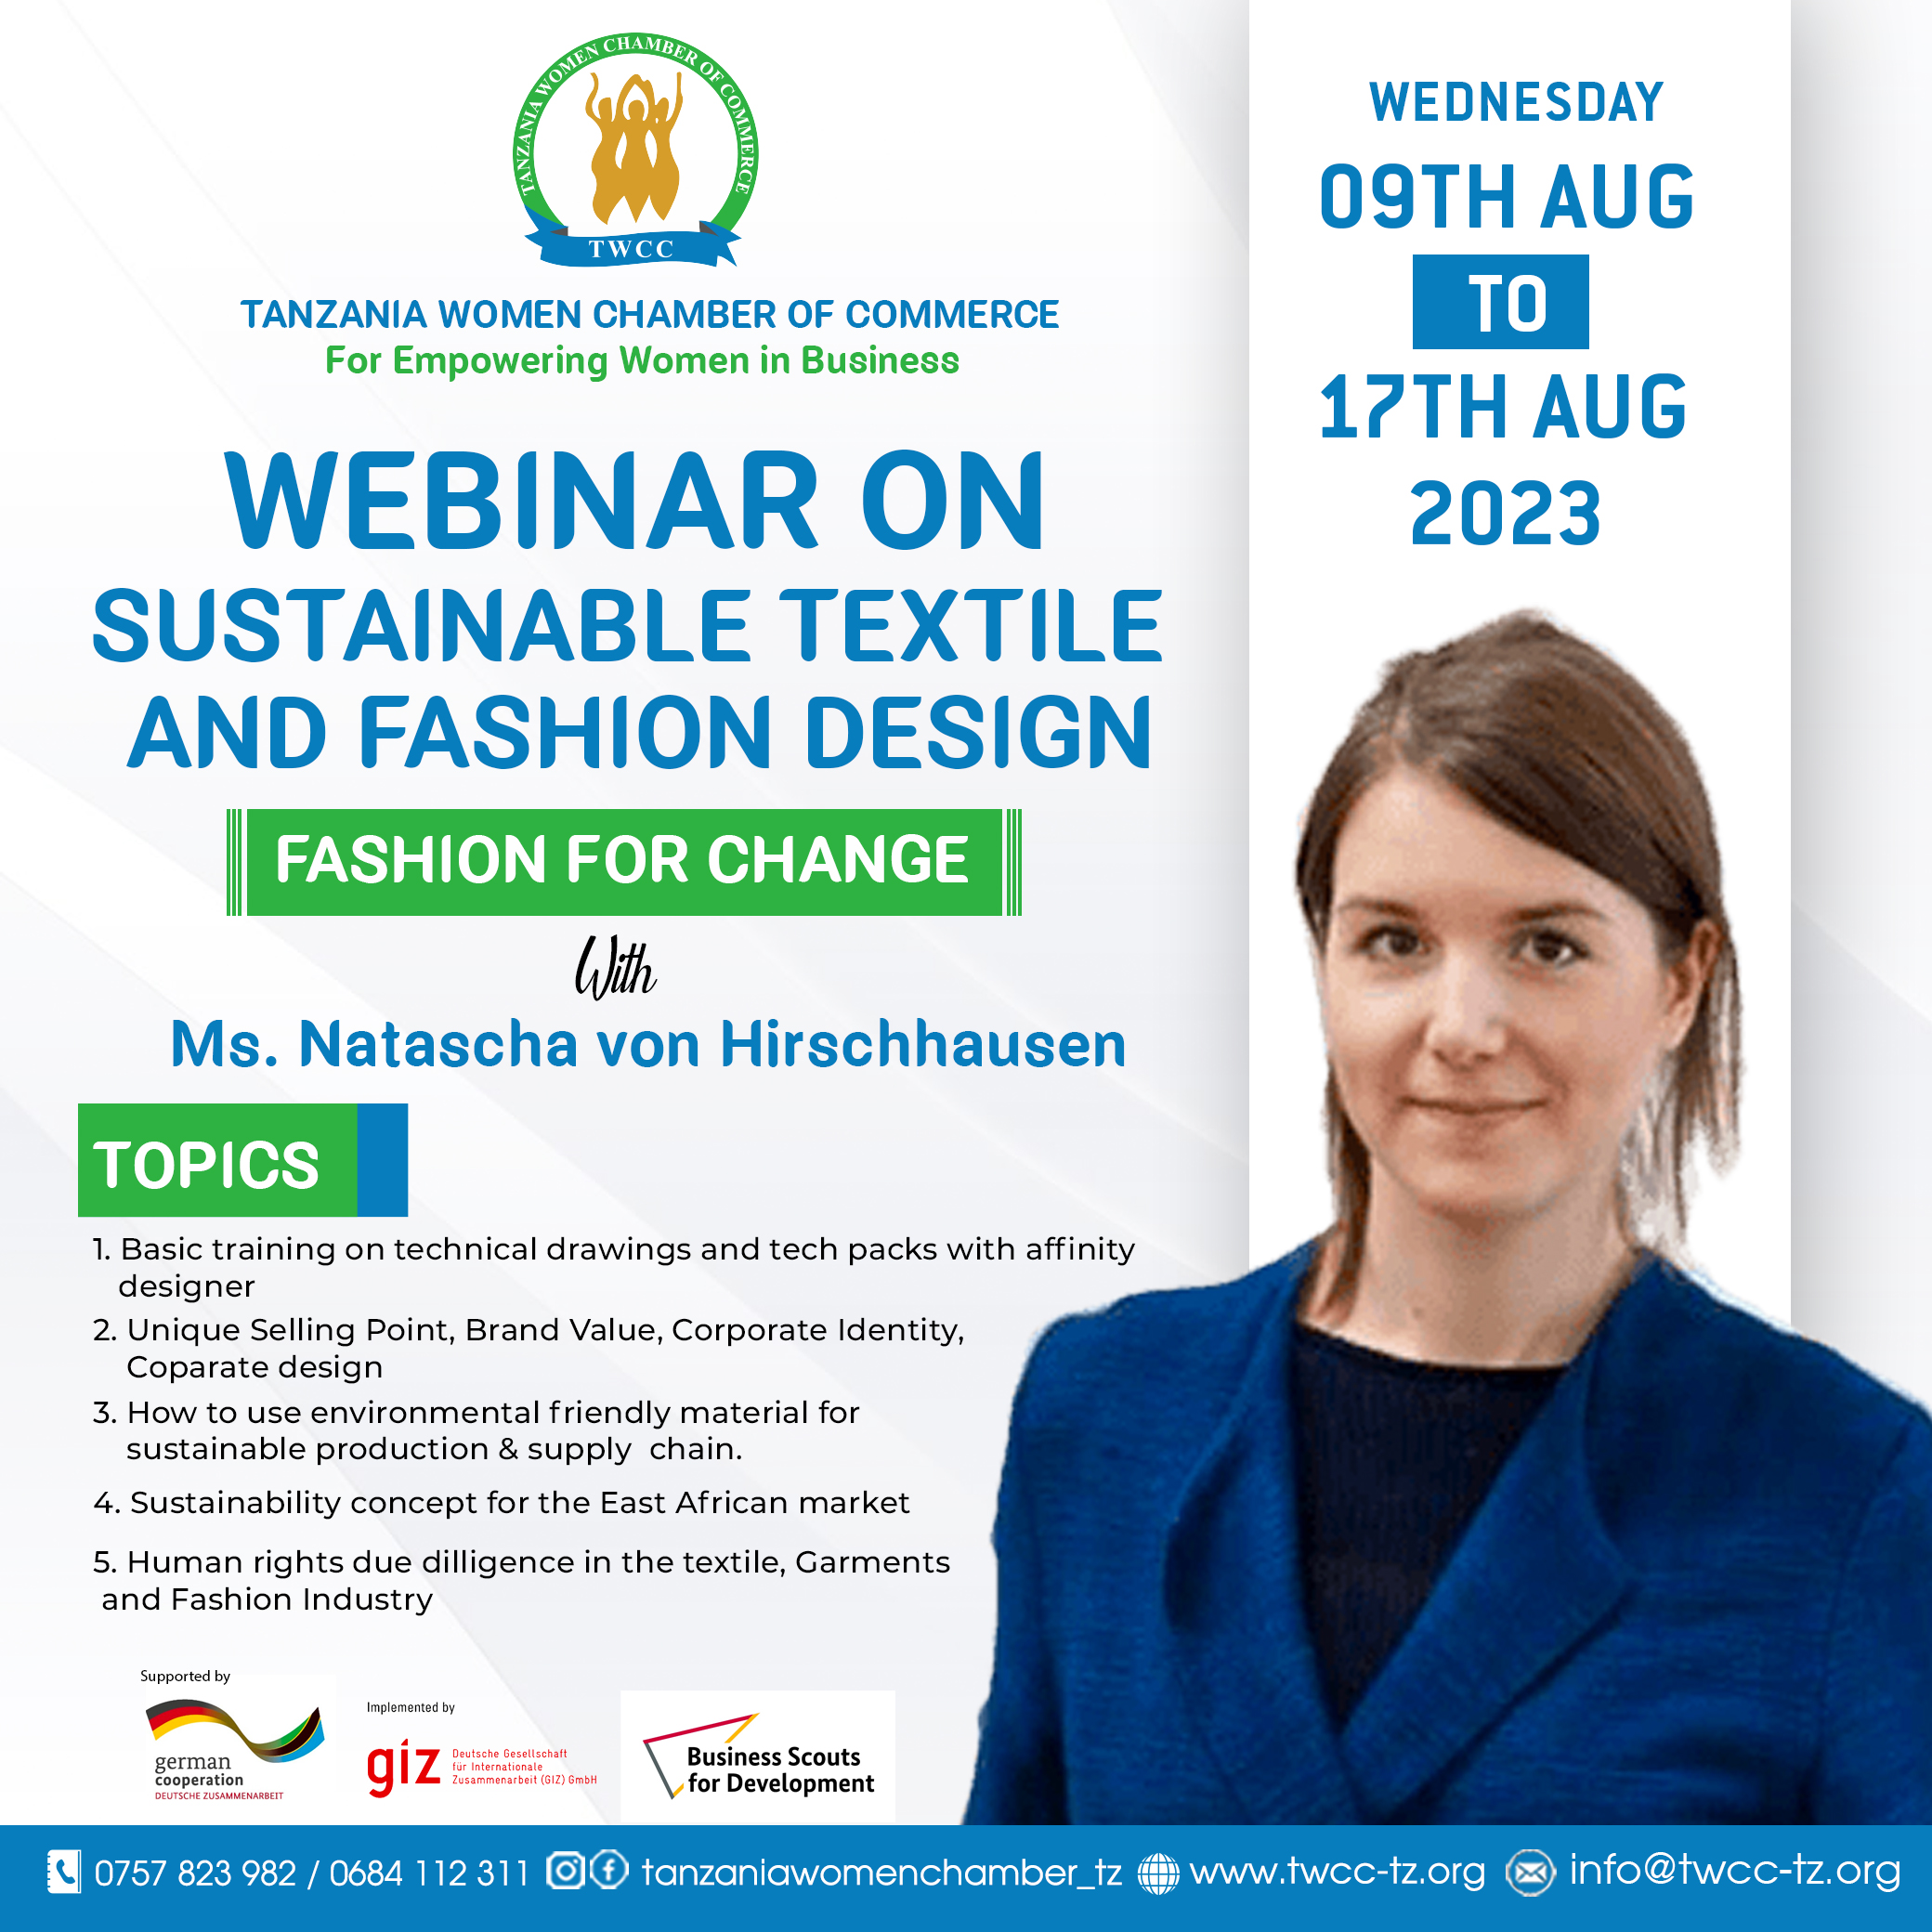 WEBINAR ON SUSTAINABLE TEXTILE AND FASHION DESIGN